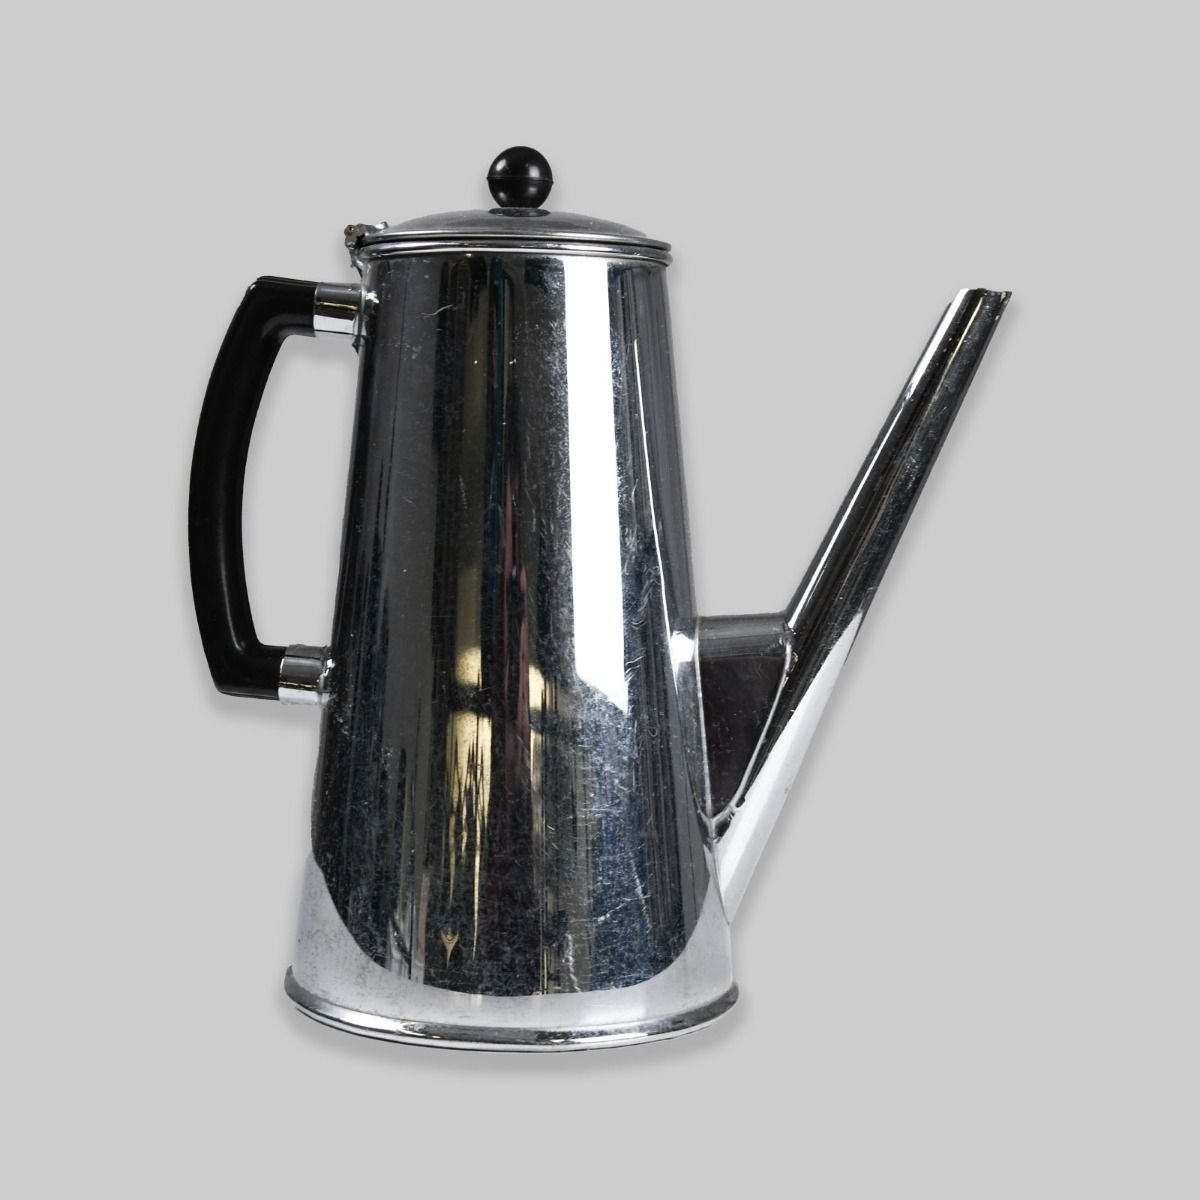 Vintage 1960s Stainless Steel Coffee Pot